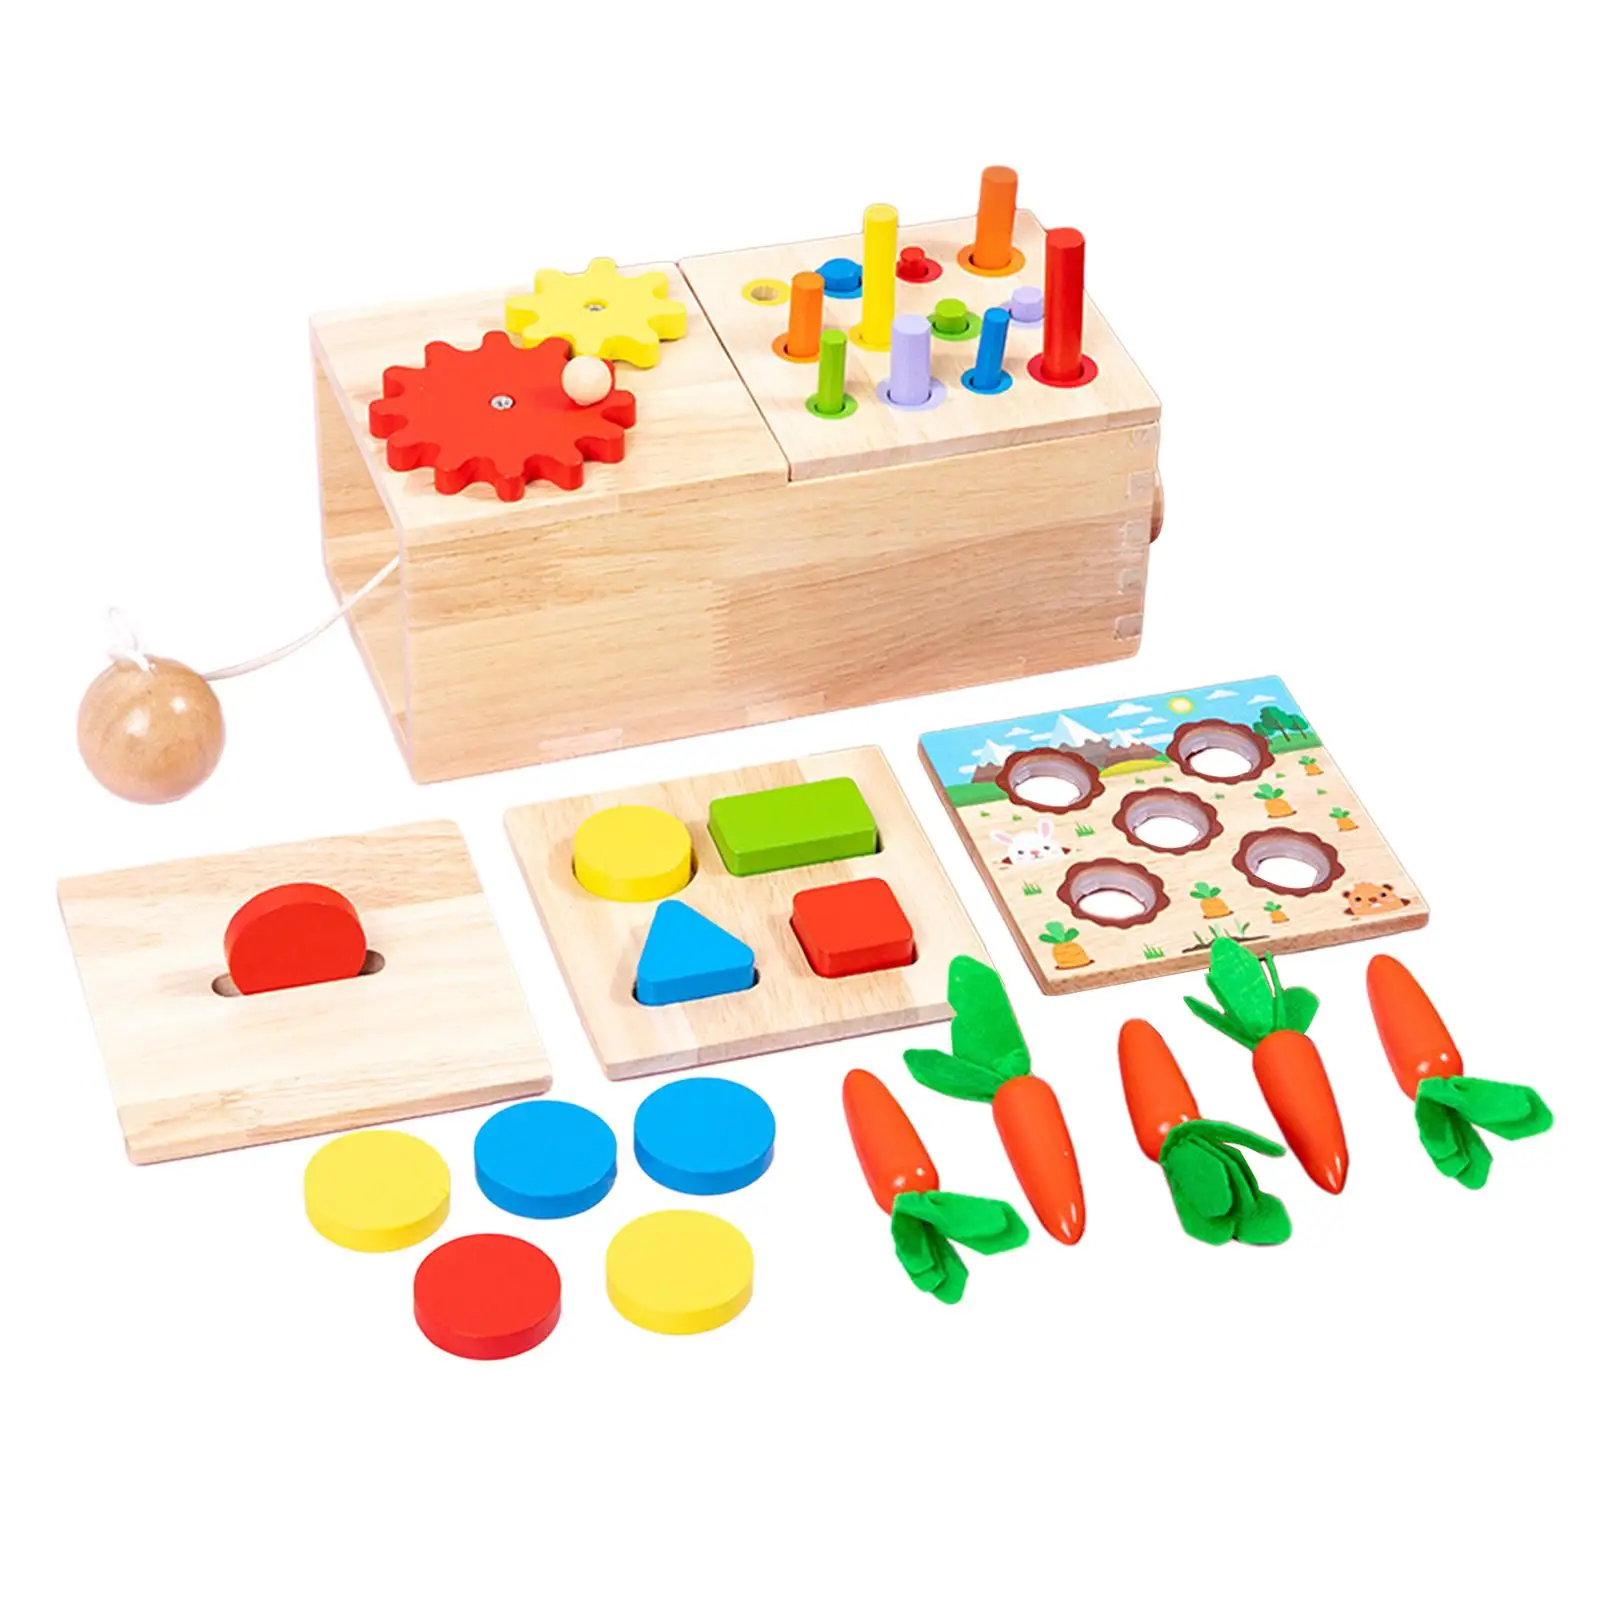 

6 in 1 Wooden Play Set Pound Ball Montessori Toy Object Permanence Box Carrot Harvest for Preschool Children Holiday Gifts